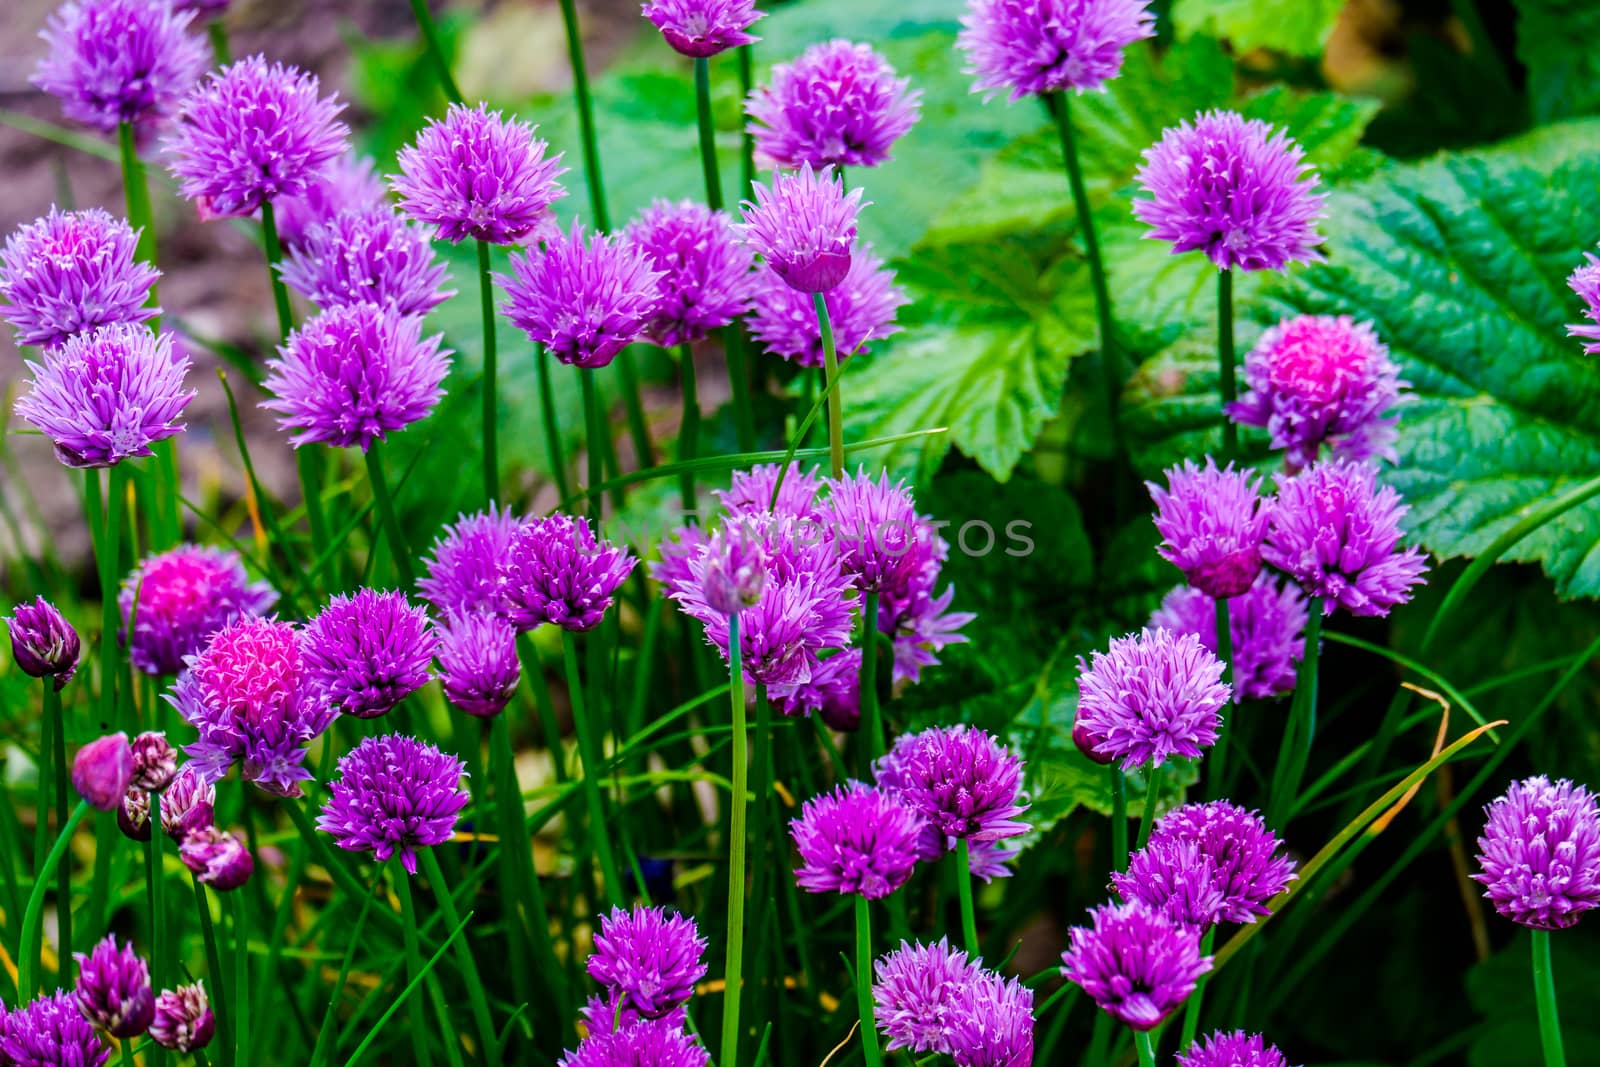 group of Chive Purple flowers in a garden by paddythegolfer